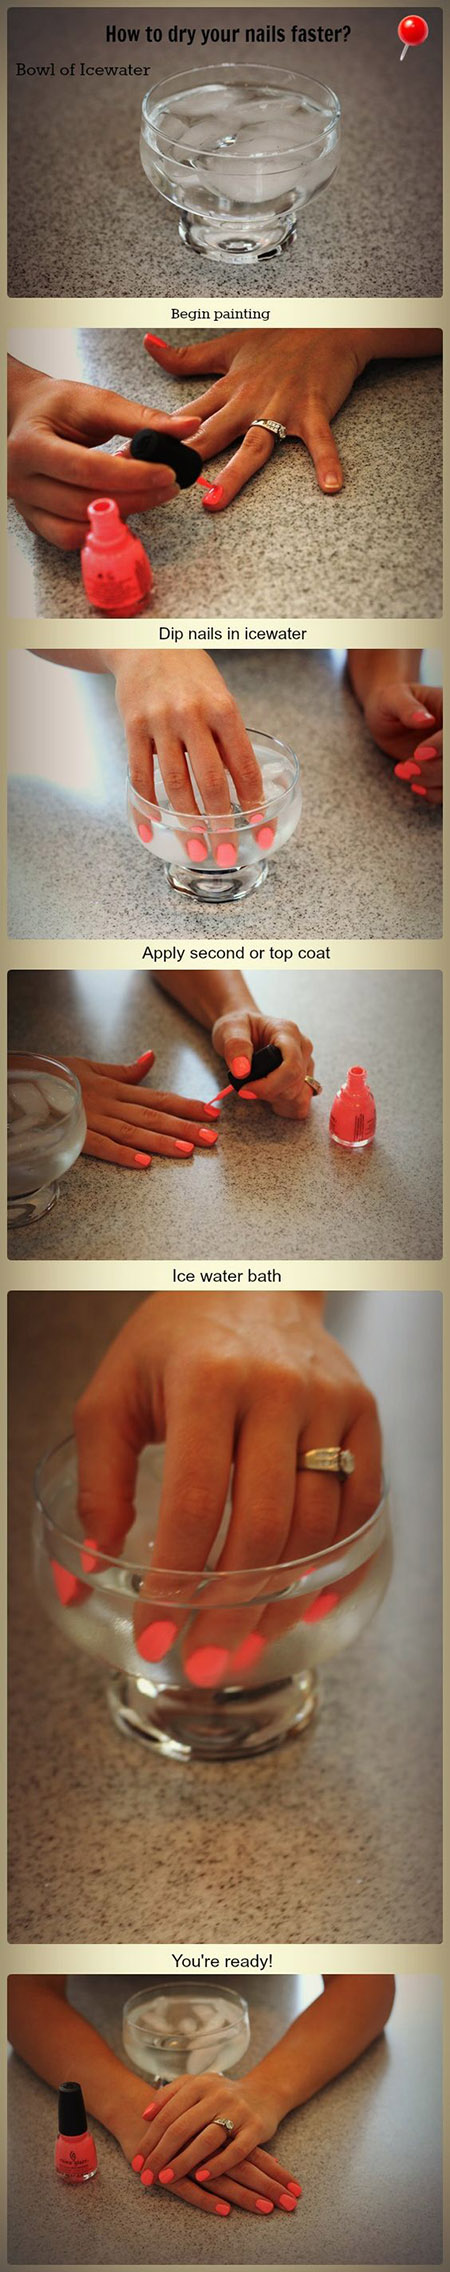 1 how to dry your nails fast and easy 25e68